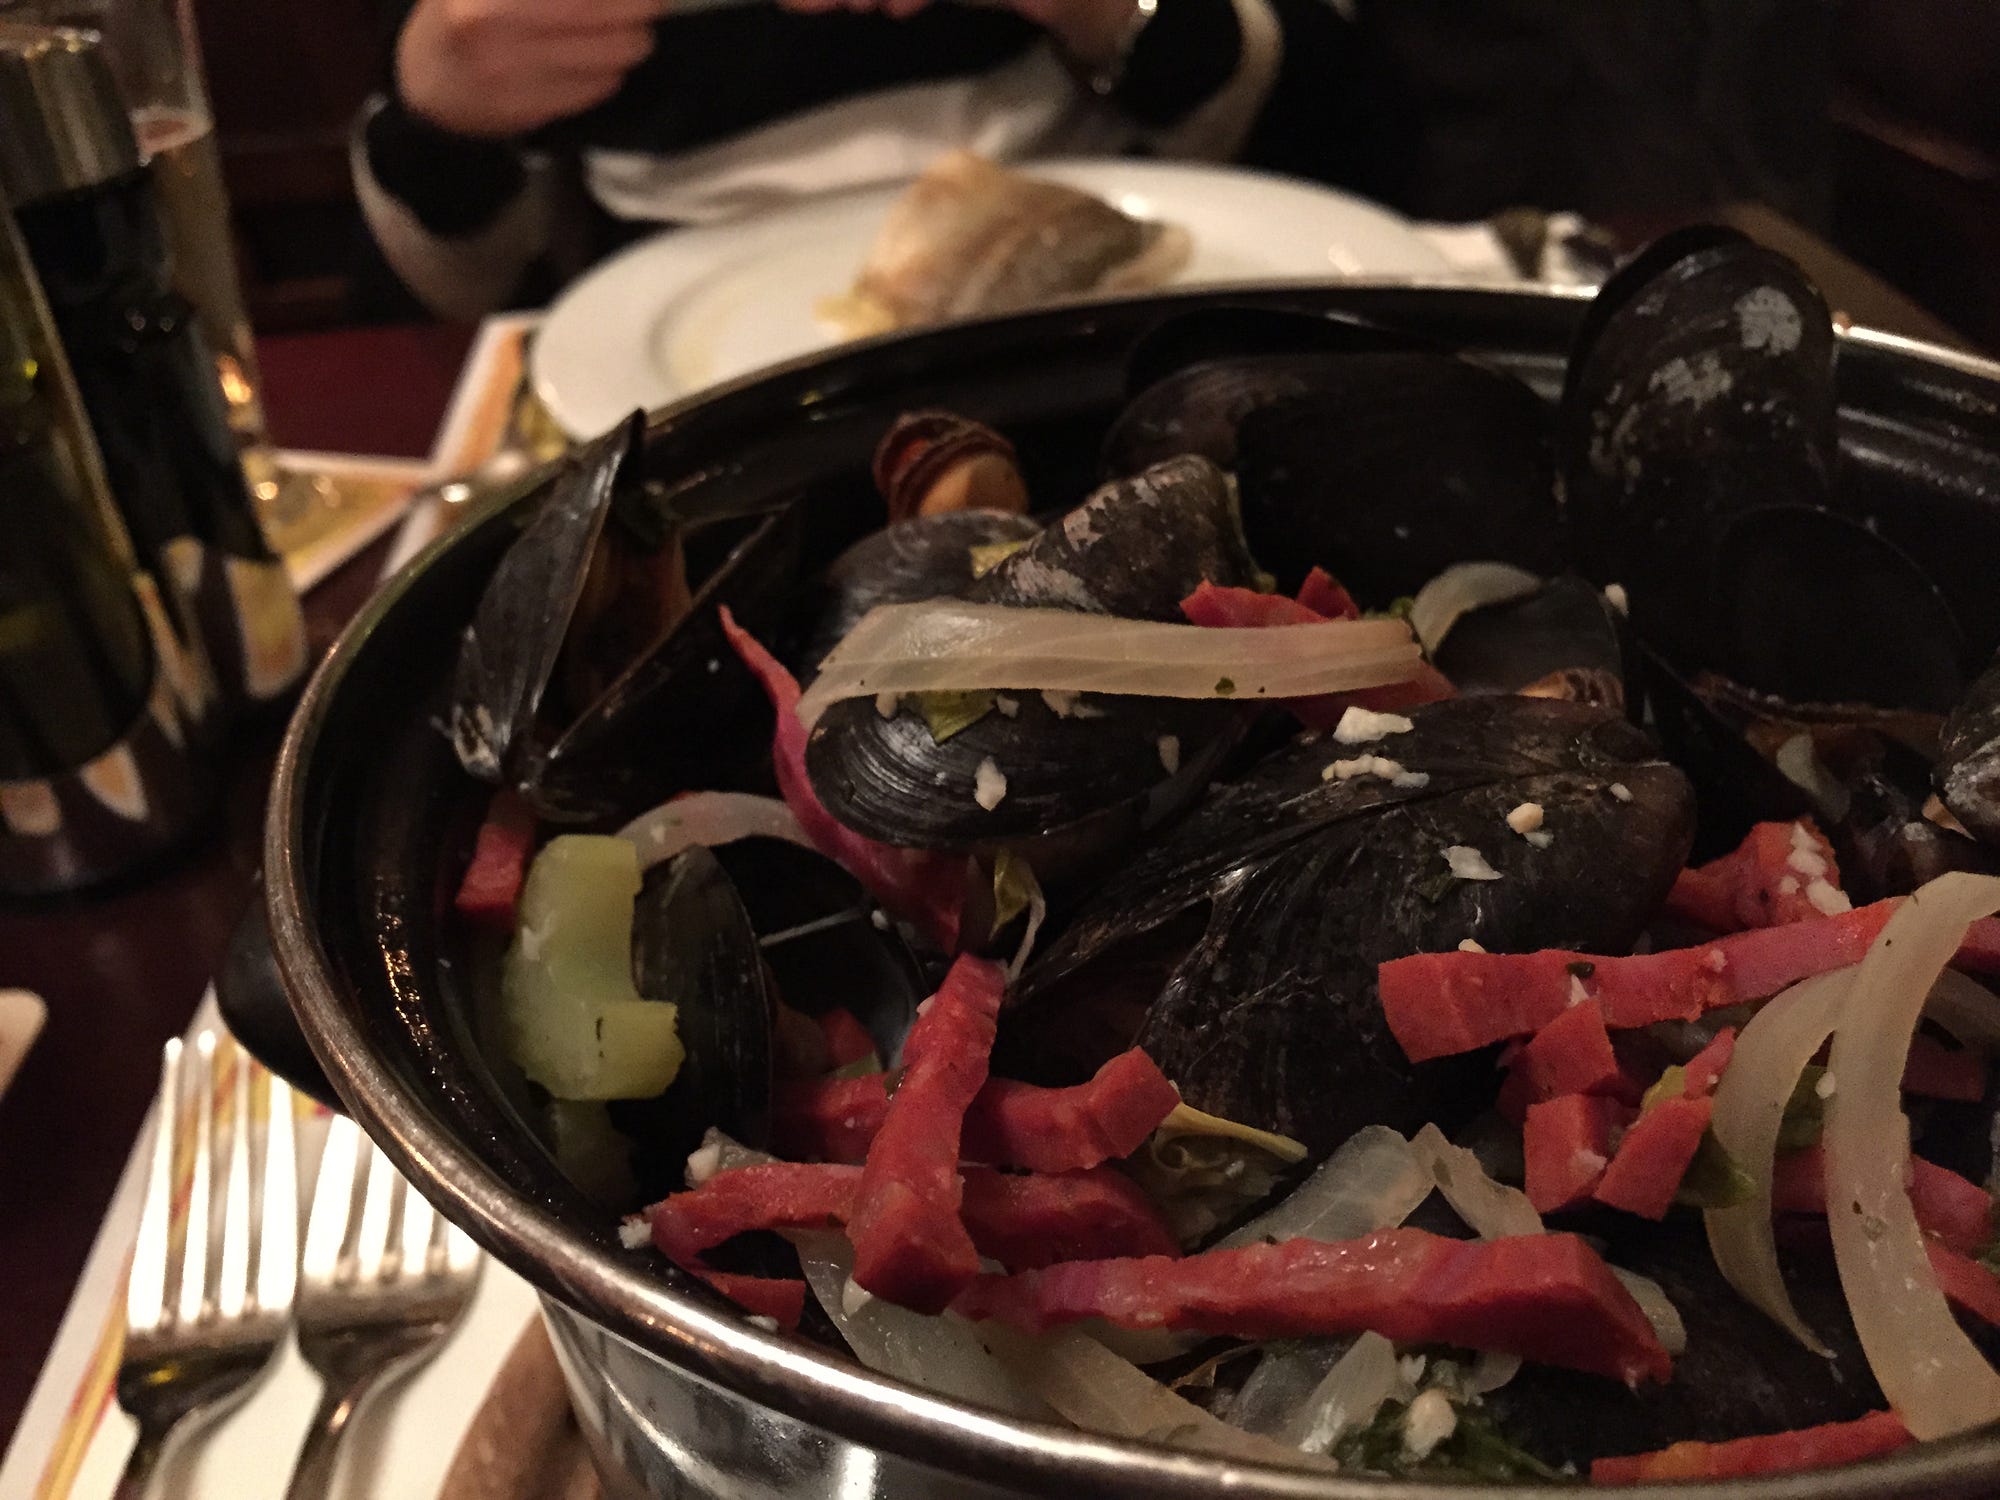 We decided to escape the traditional fares and opted for something international. This dish is a pot of mussels at a Belgian Restaurant.